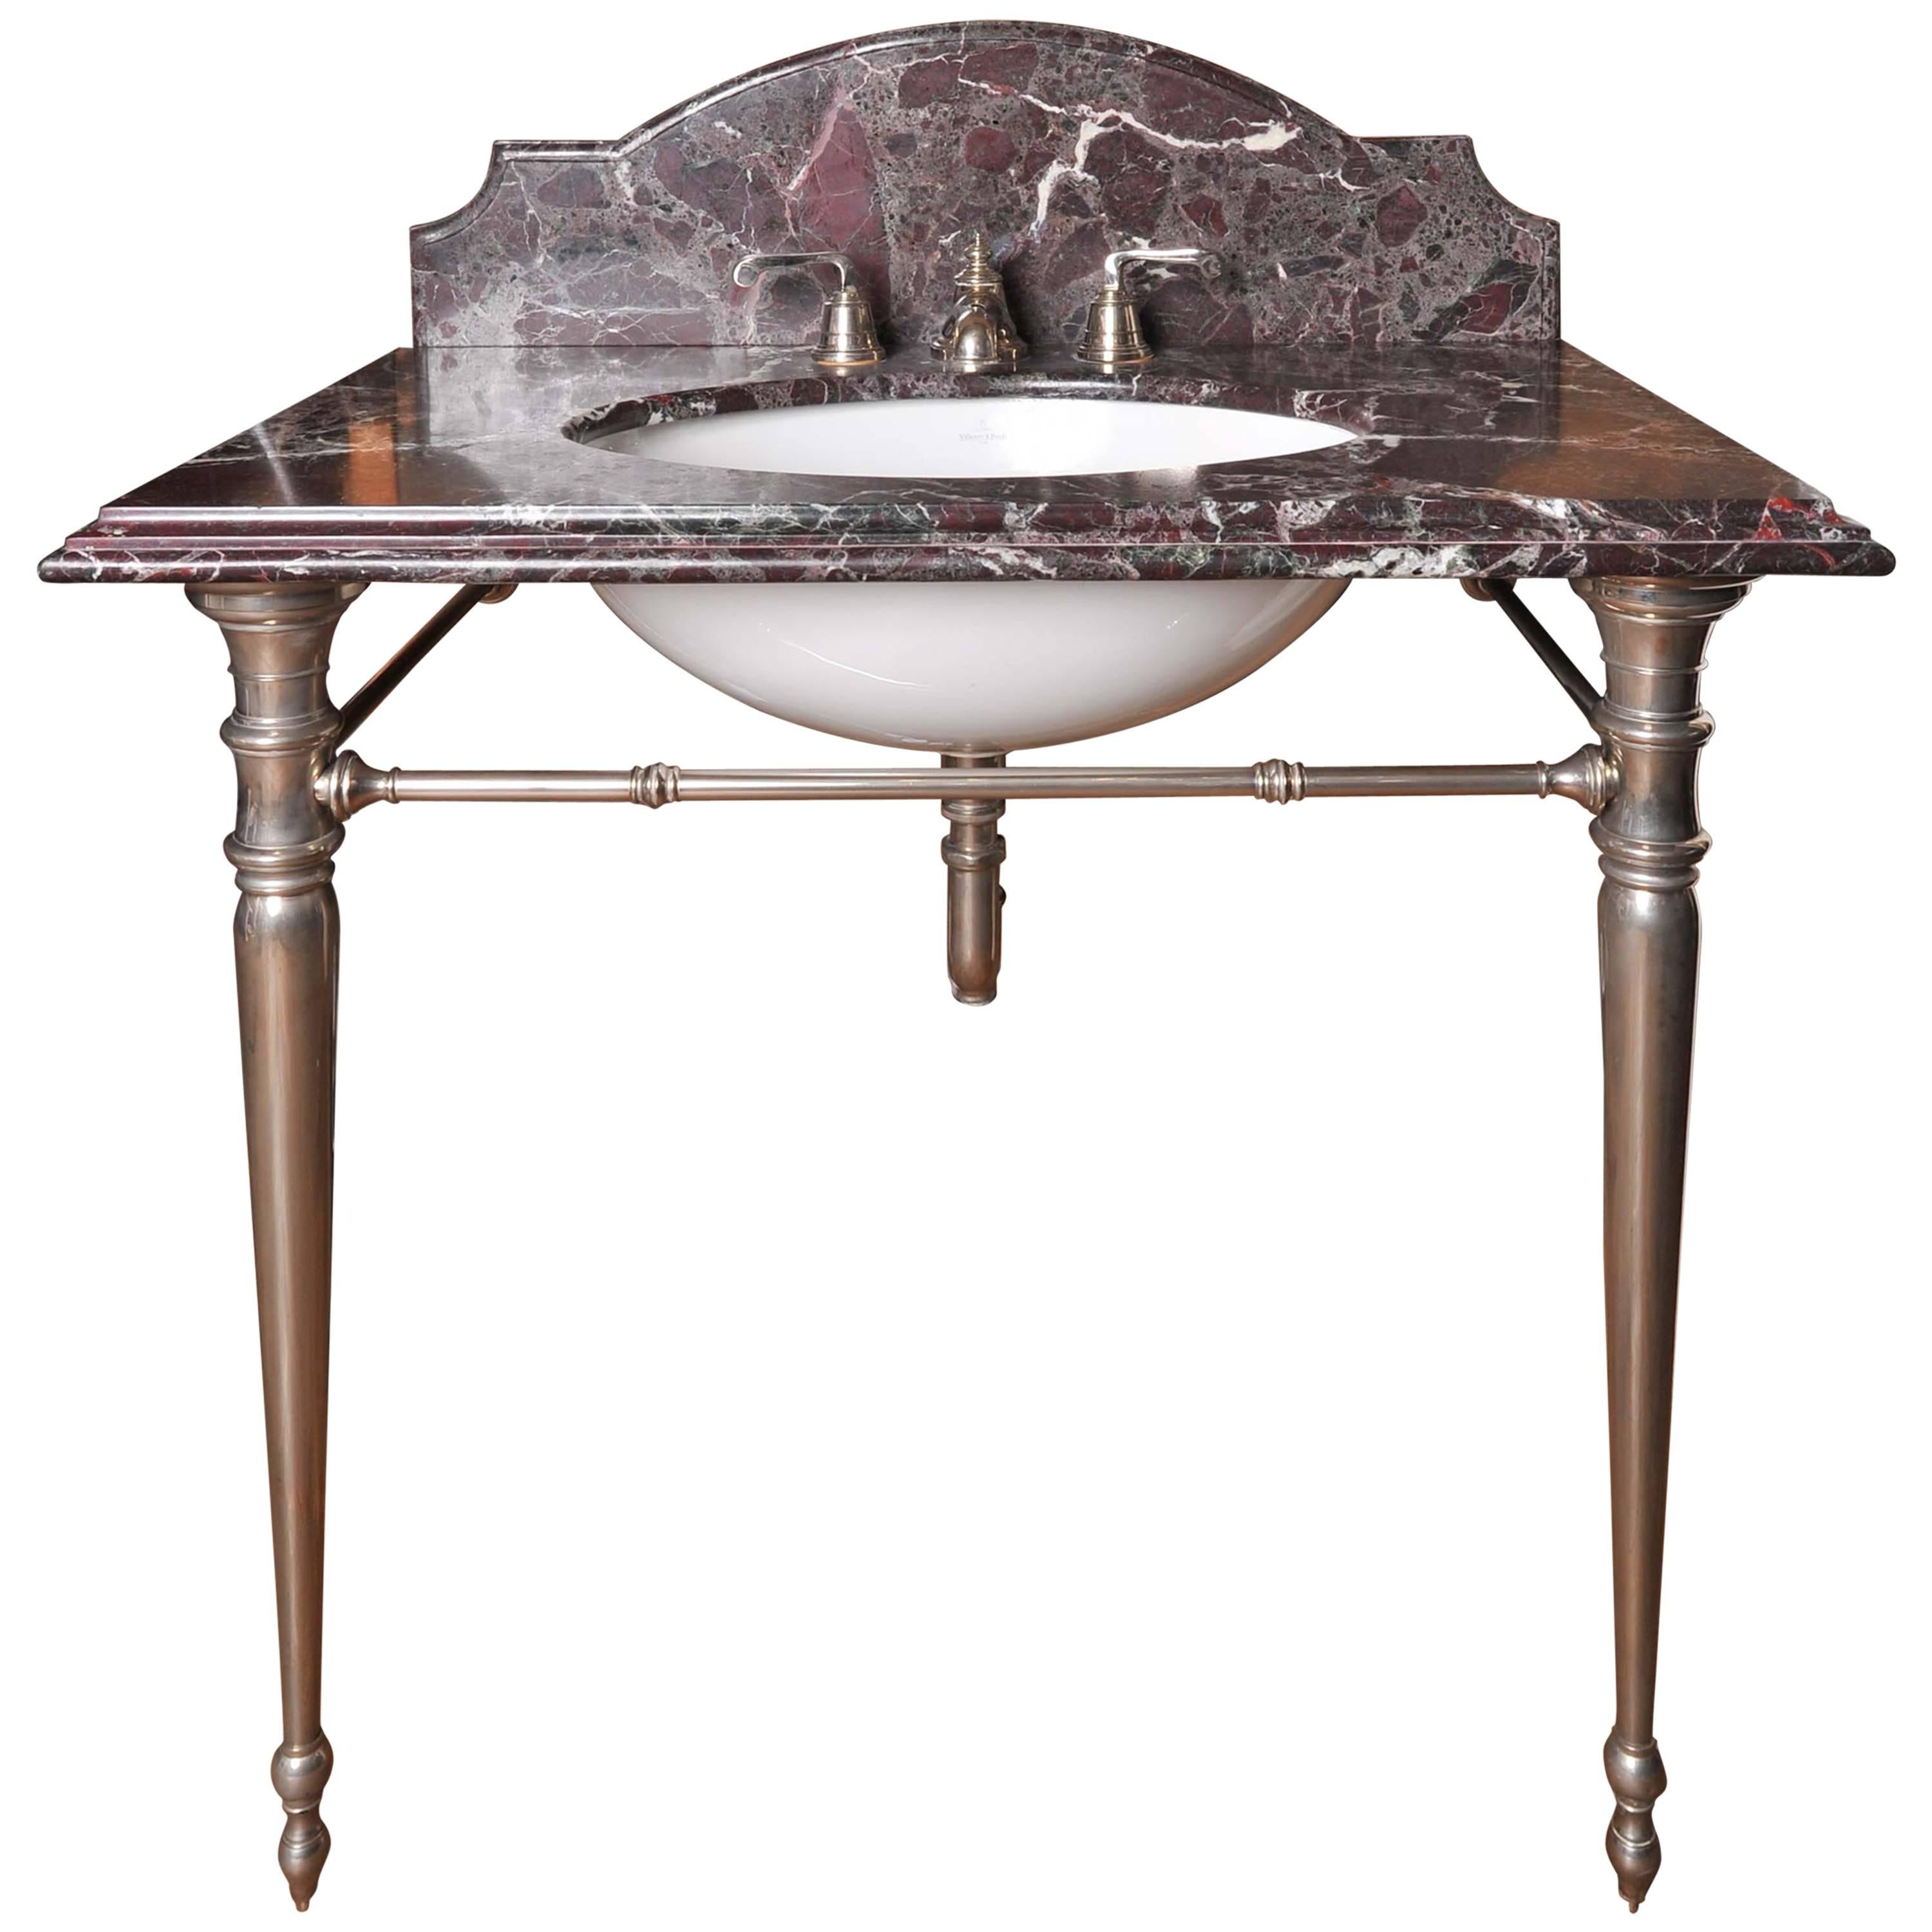 Marble and Nickel Washstand Sink